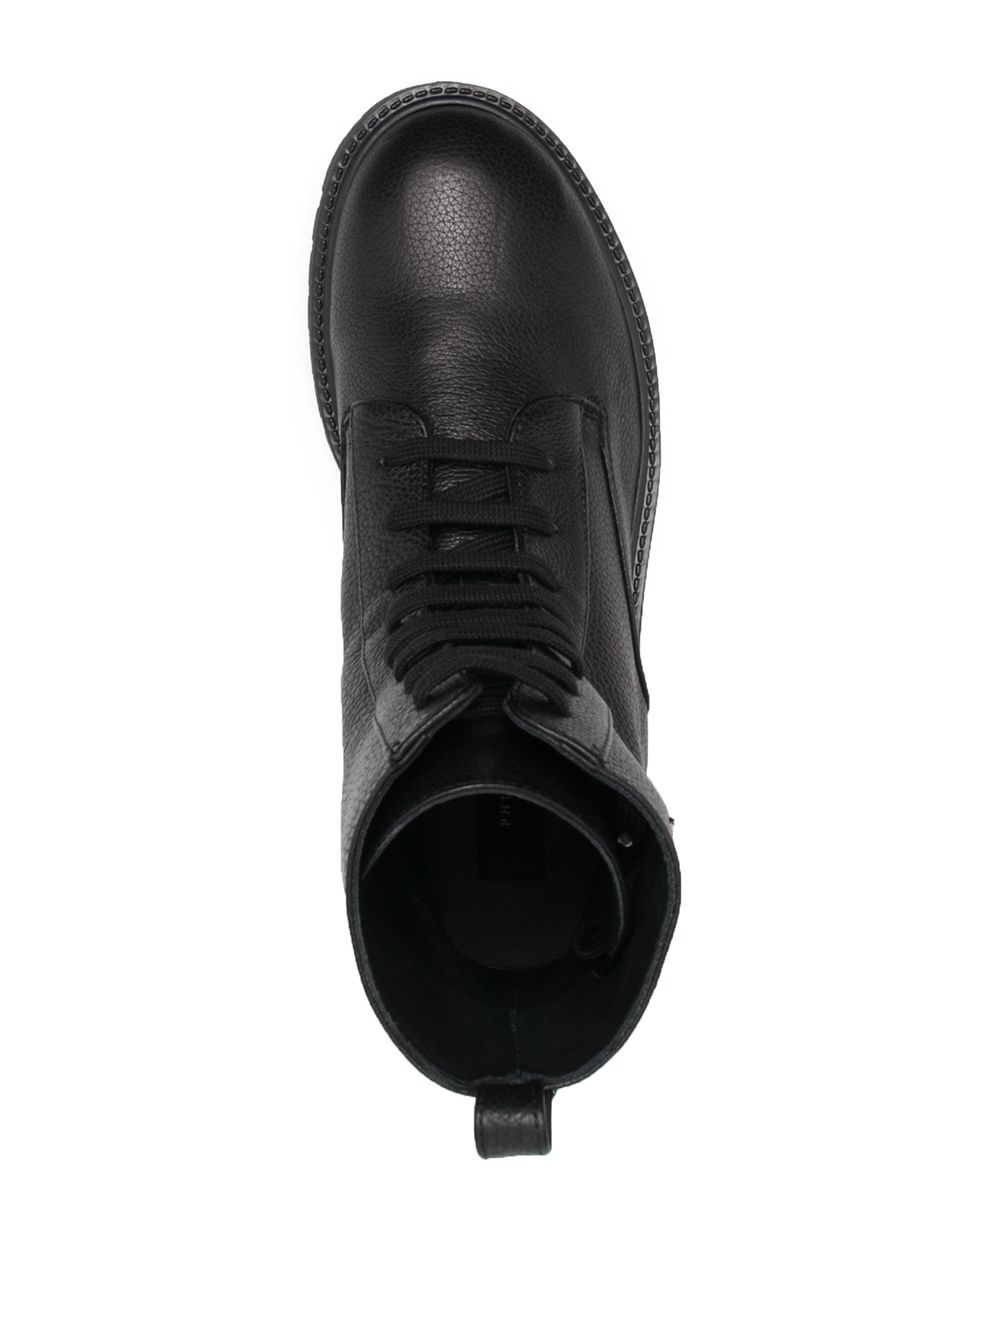 lace-up leather boots - 4